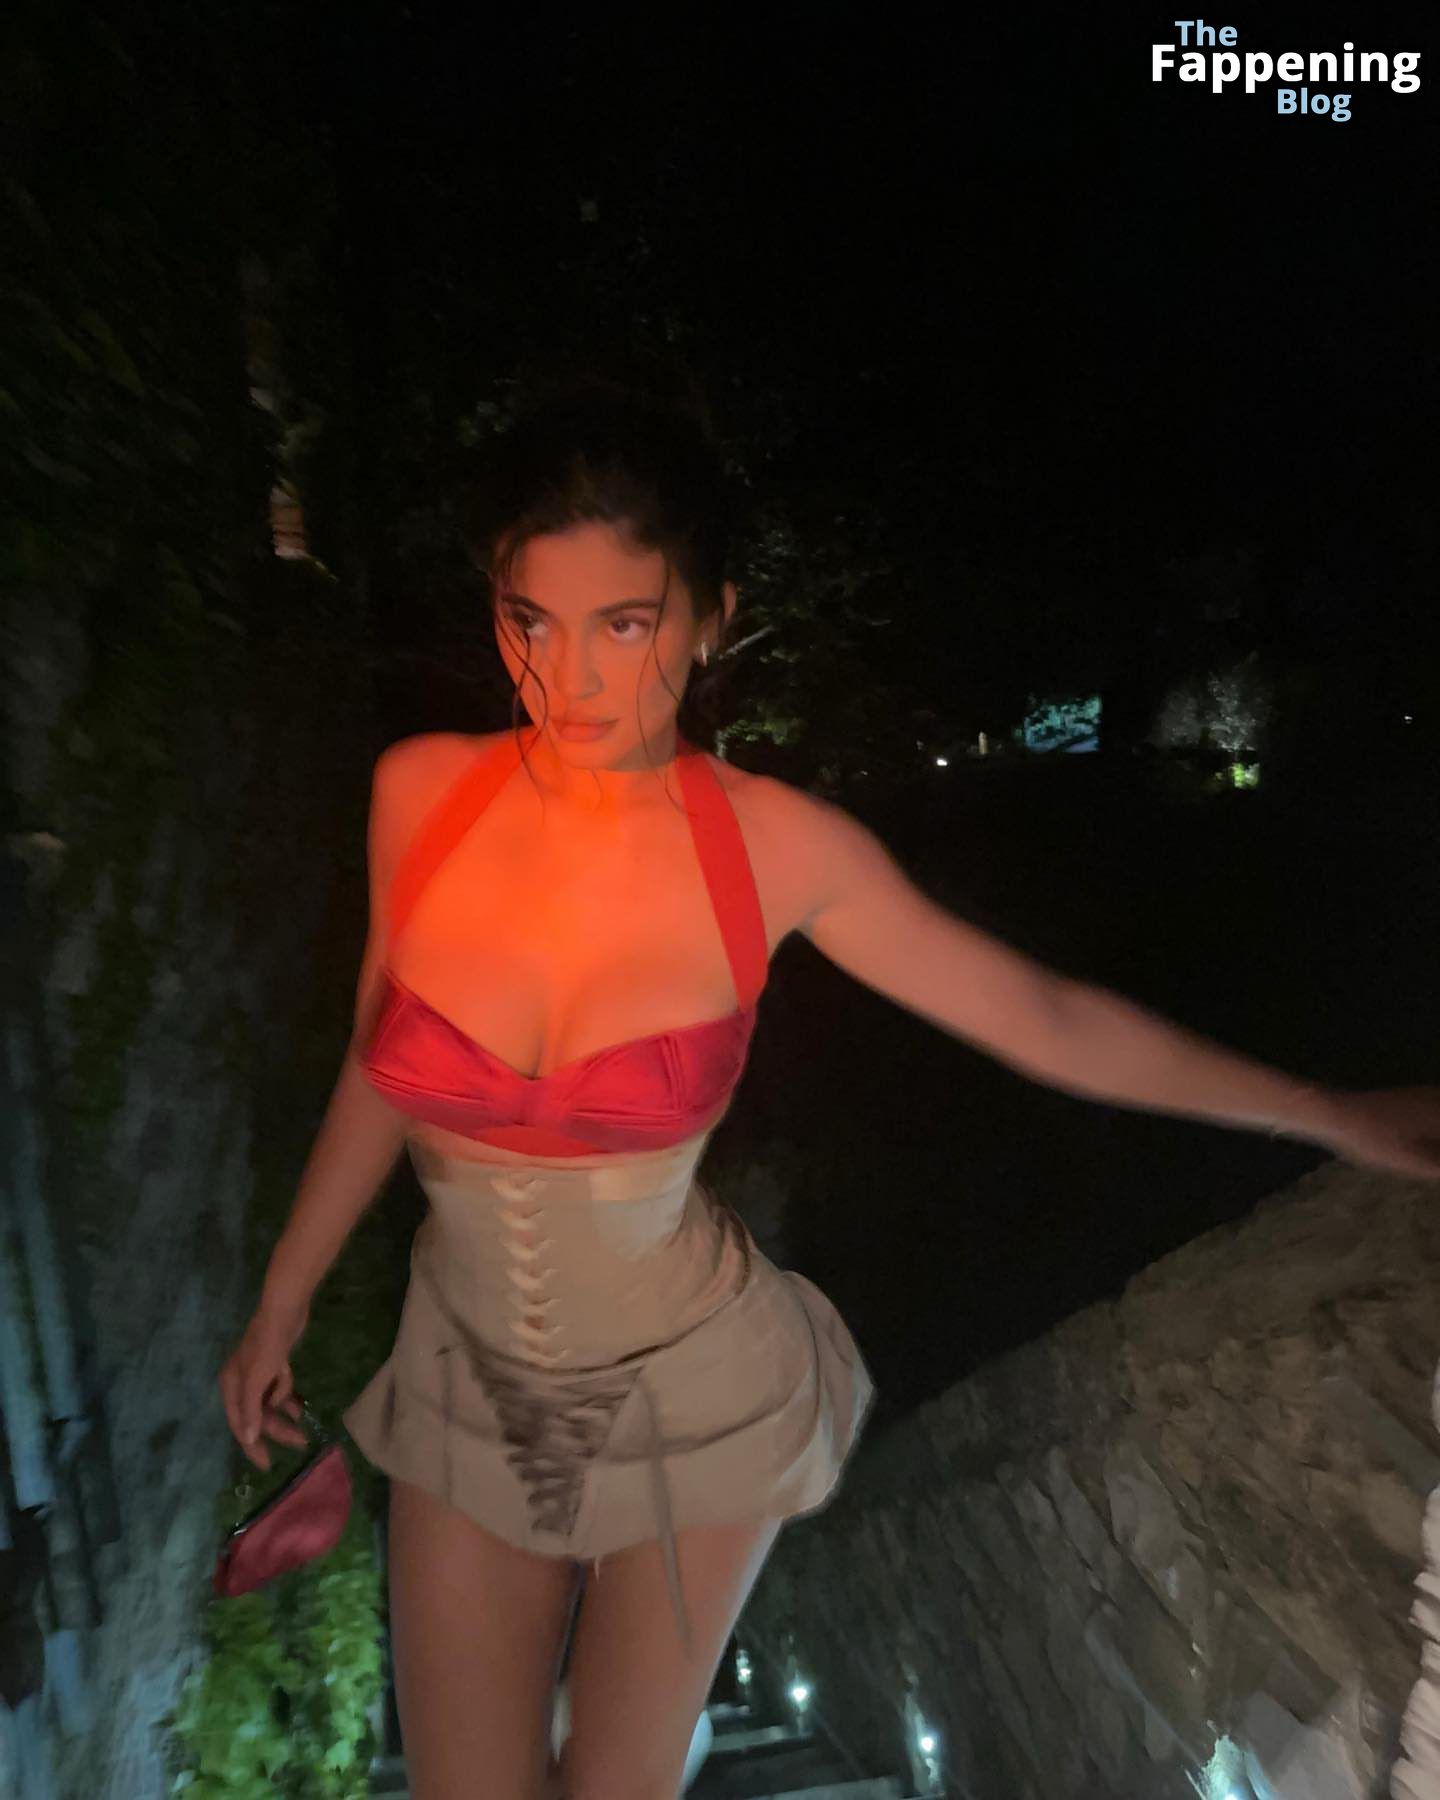 Kylie Jenner Looks Hot in a Red Top (7 Photos)